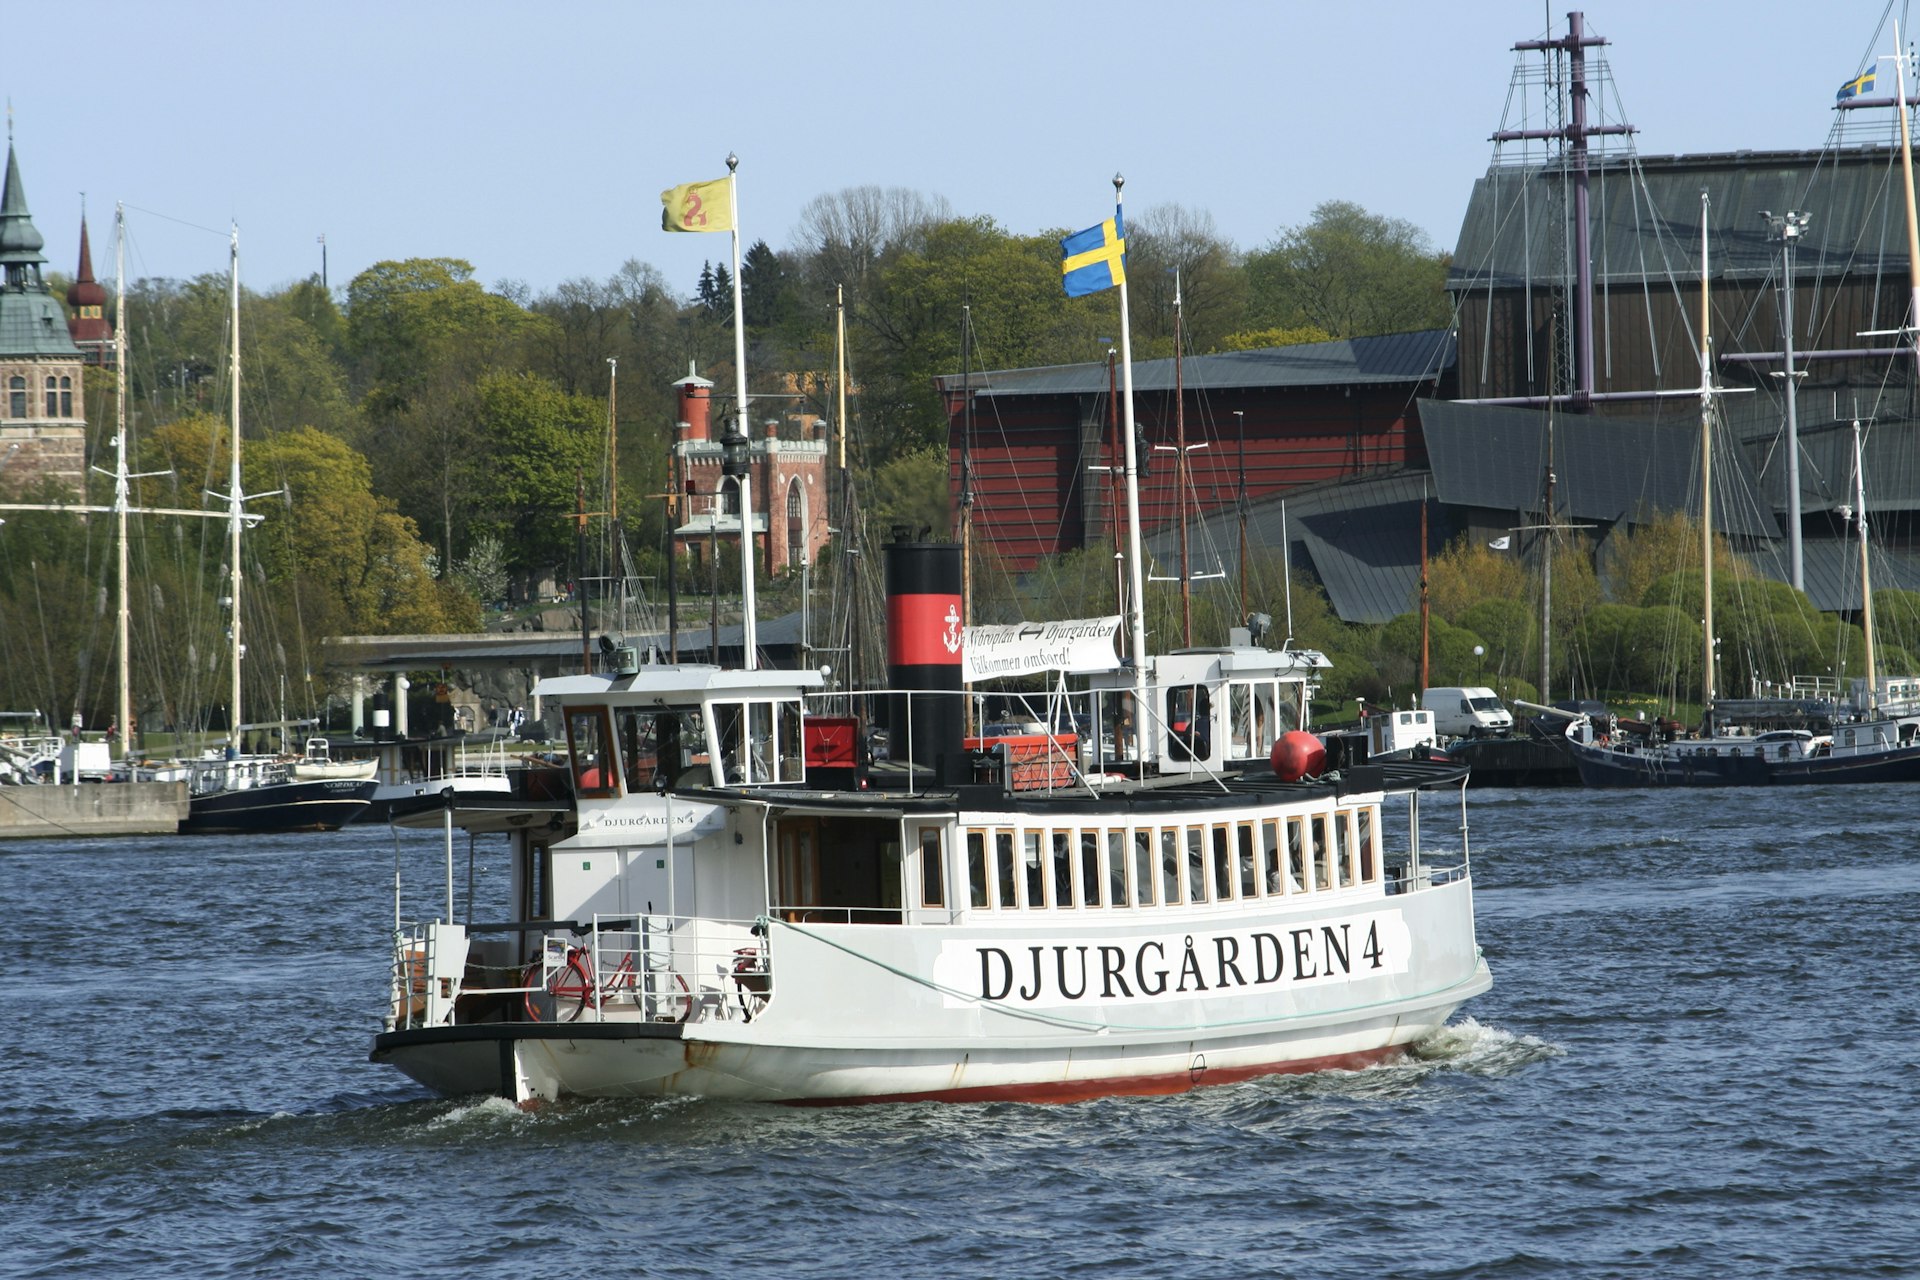 A small white ferry on the water with Djurgarden written on the side 